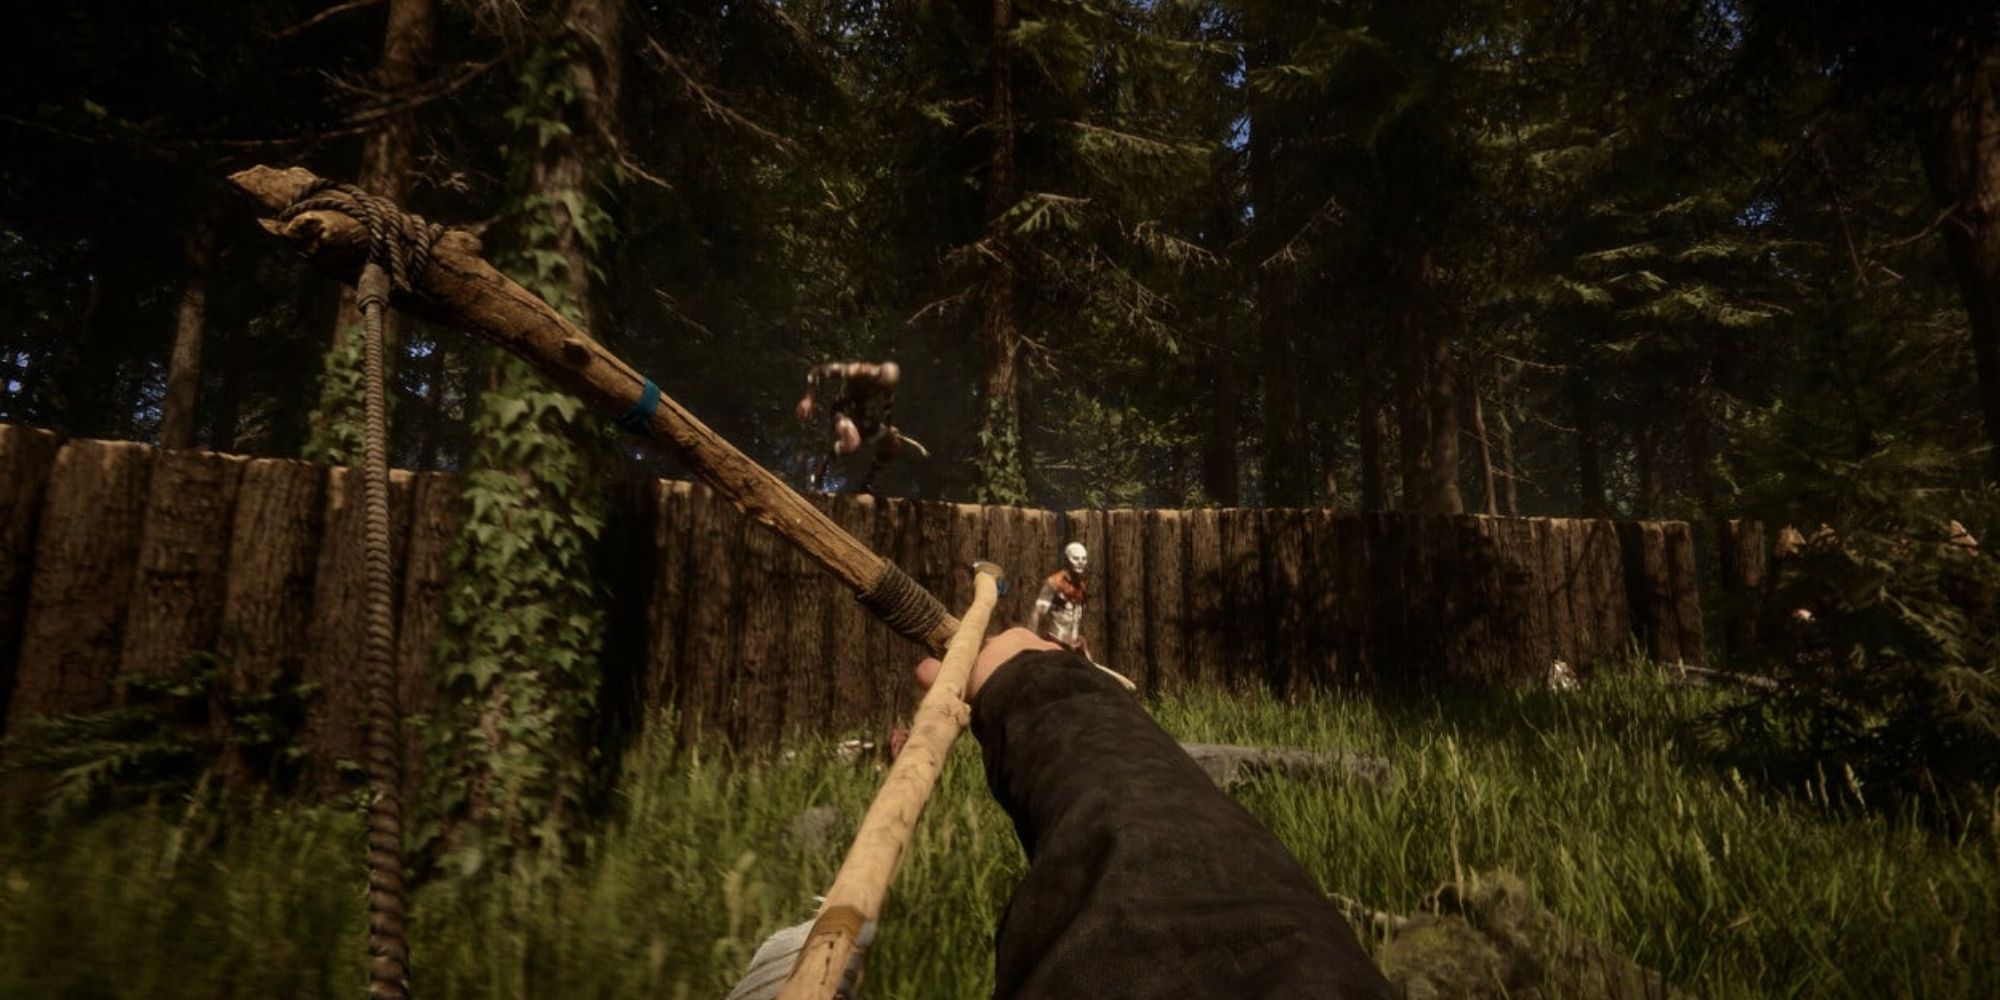 An image of the crafting bow from Sons of the Forest where the player aims the bow at cannibals climbing a wall. 